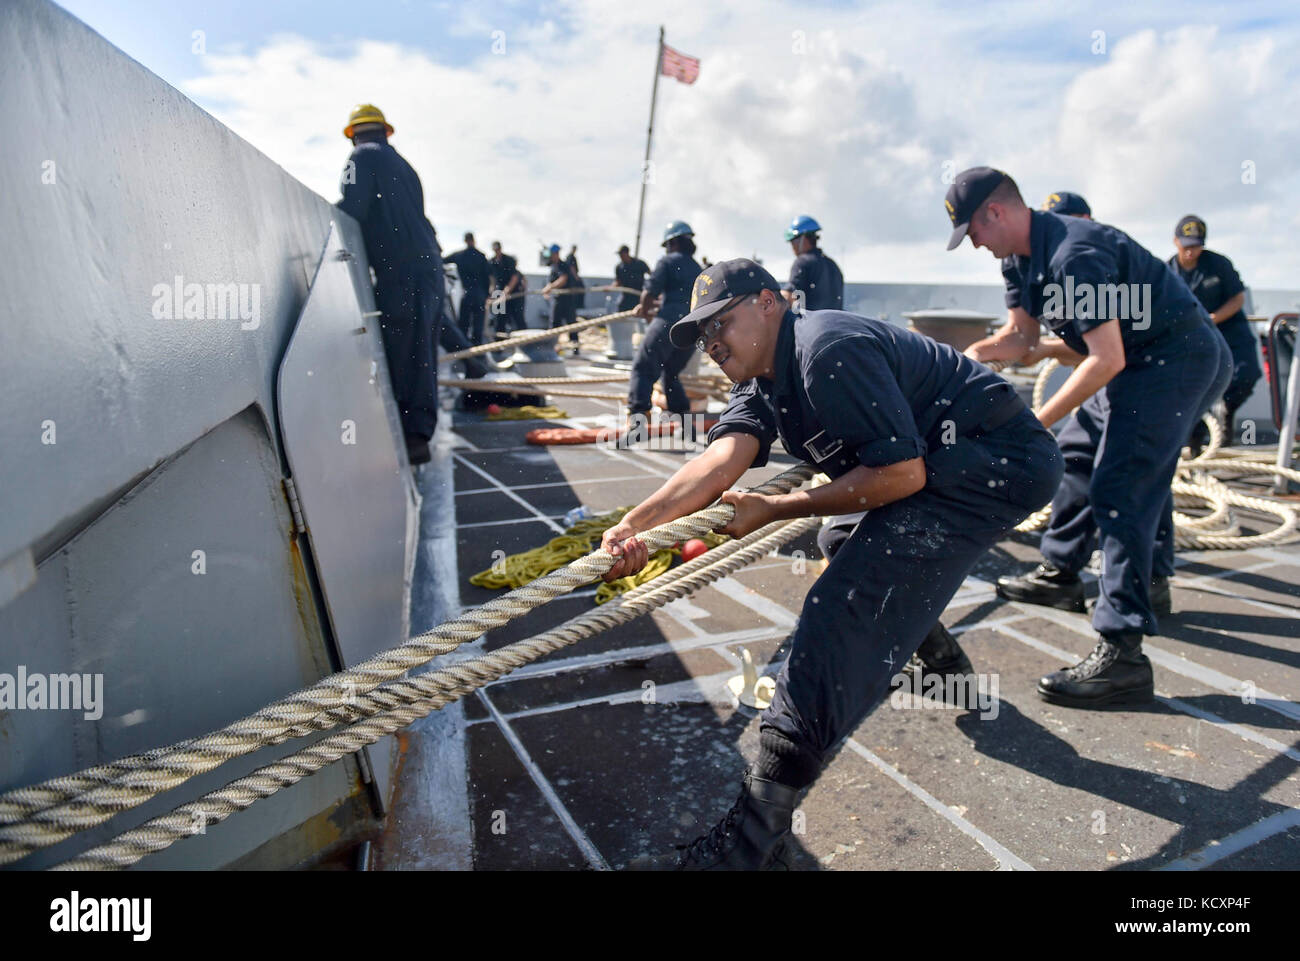 171007-N-PC620-0022  MAYPORT, Fla. (Oct. 7, 2017) Seaman Taechawn Edmonson,  a native of Canton, Ohio, heaves a mooring line during sea-and-anchor evolutions aboard the amphibious transport dock ship USS New York (LPD 21). New York departed Naval Station Mayport, Florida, to support the Gulf coast region in the event assistance is needed in the wake of Hurricane Nate. (U.S. Navy photo by Mass Communication Specialist Seaman Michael Lehman/Released) Stock Photo